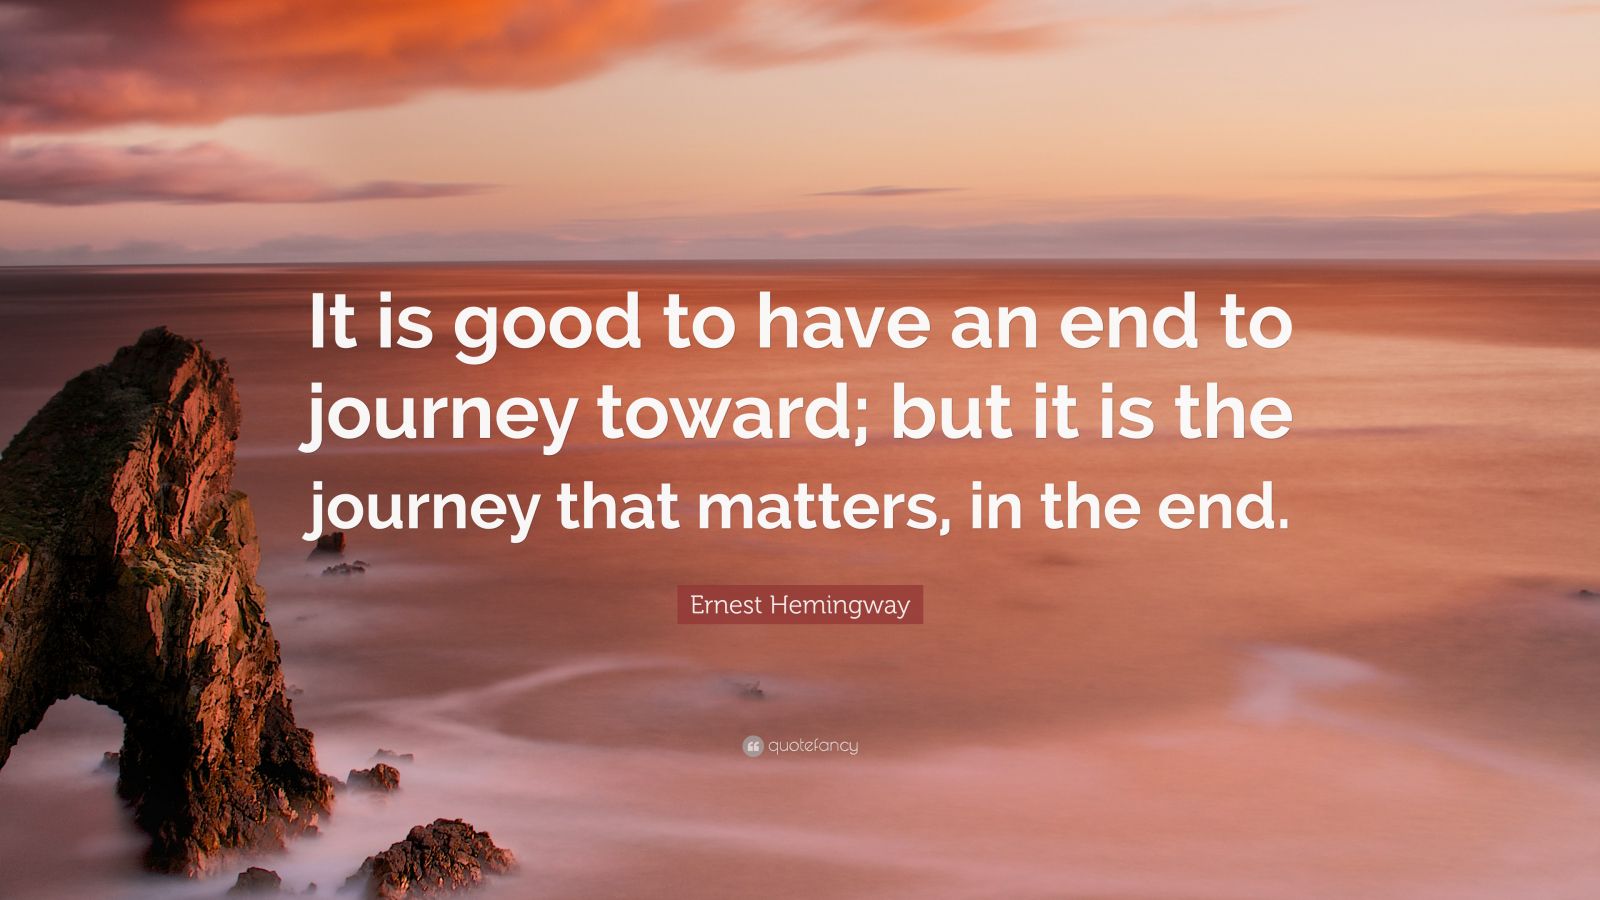 Ernest Hemingway Quote: “It is good to have an end to journey toward